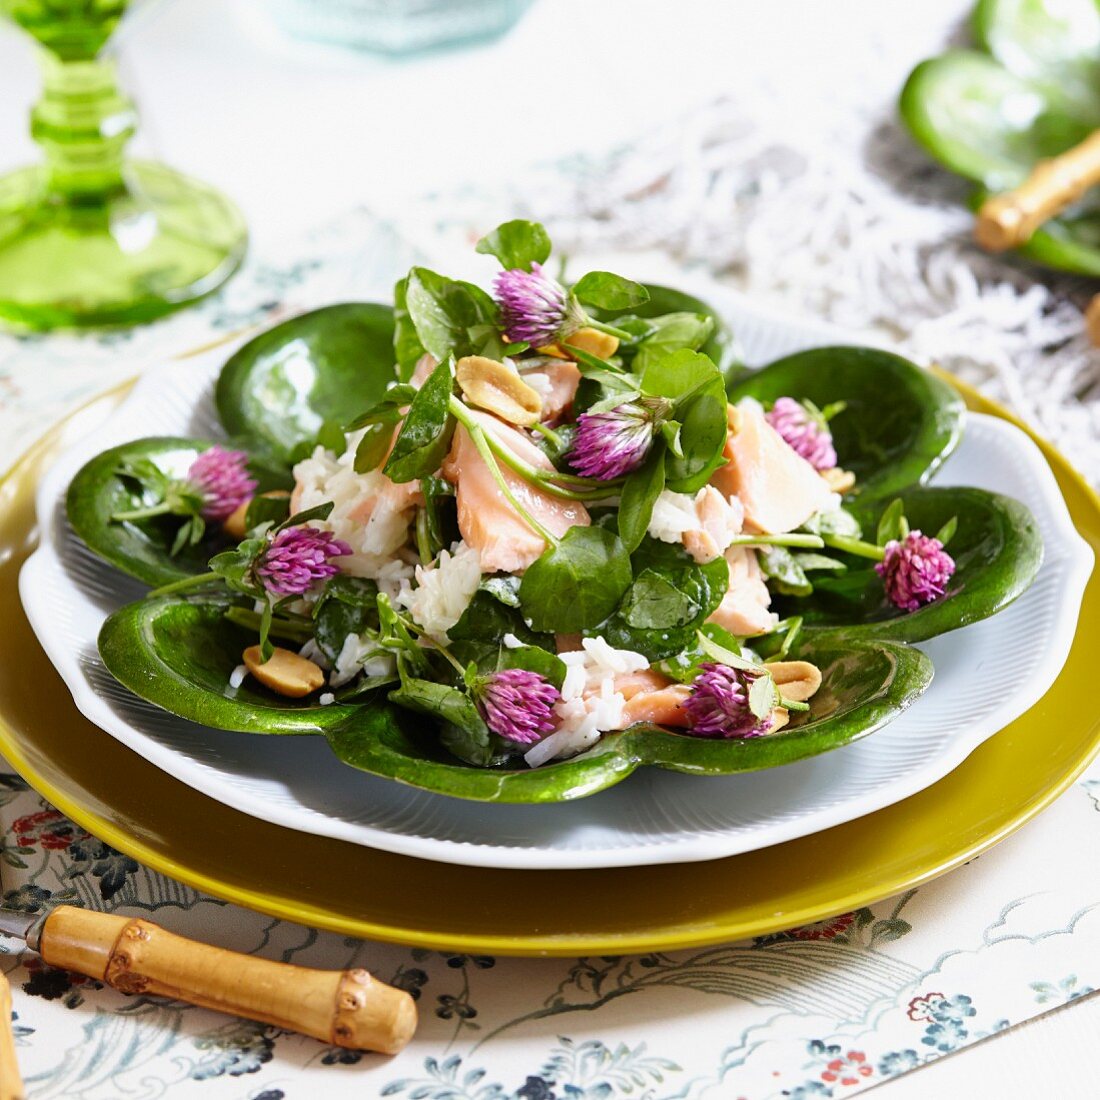 Watercress salad with salmon, clover flowers and peanuts